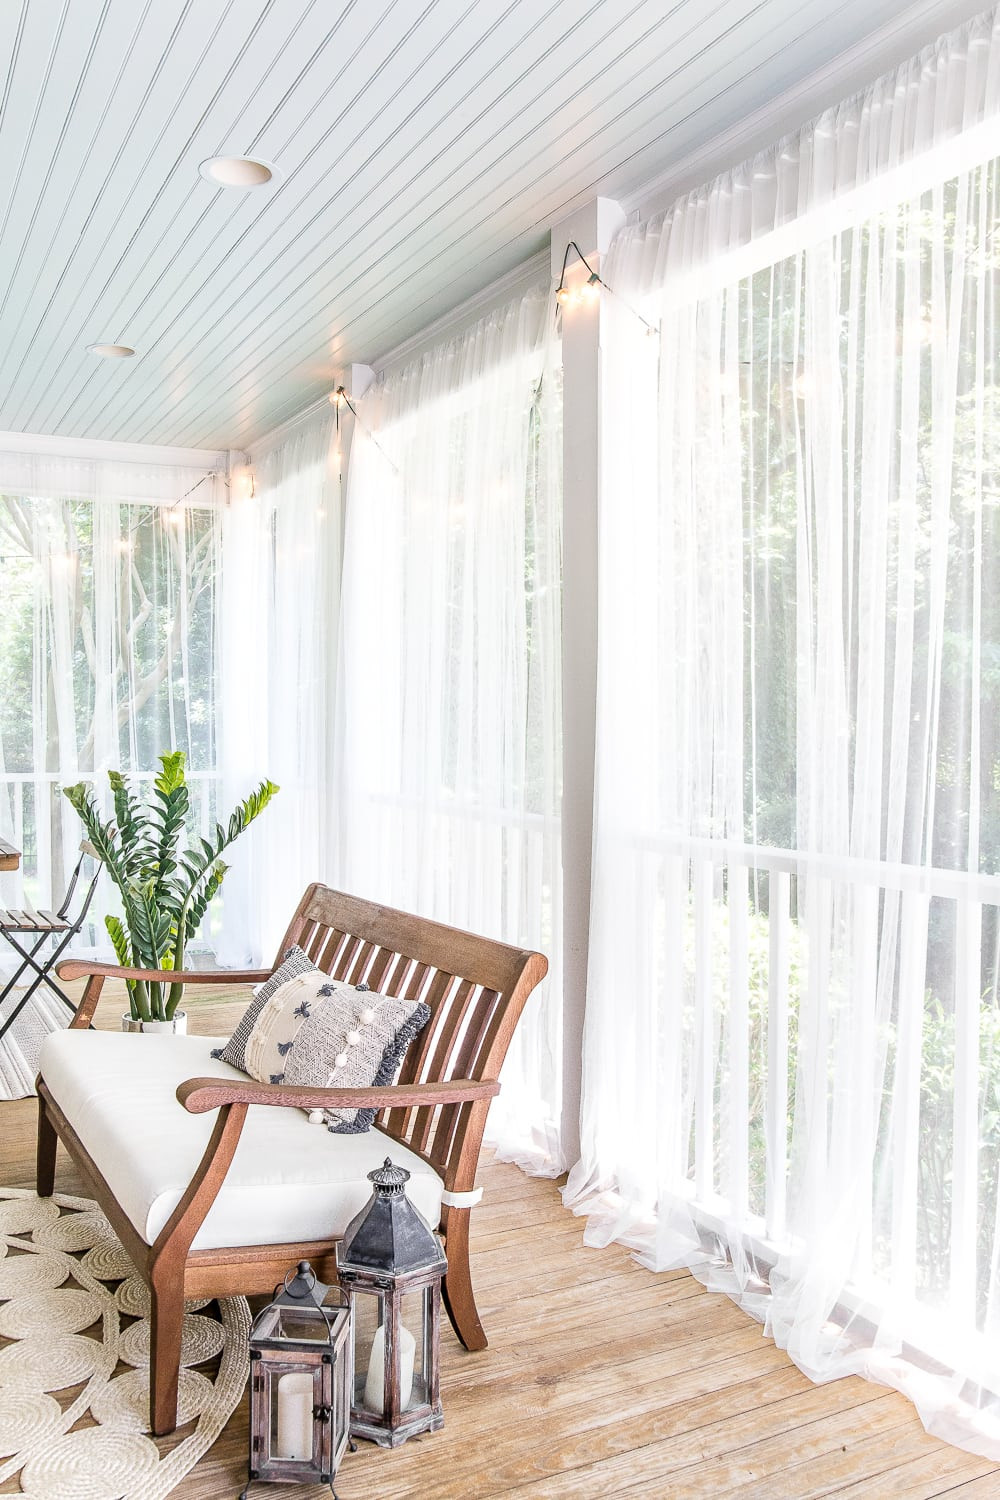 DIY Outdoor Curtains
 DIY Outdoor Curtains and Screened Porch for Under $100